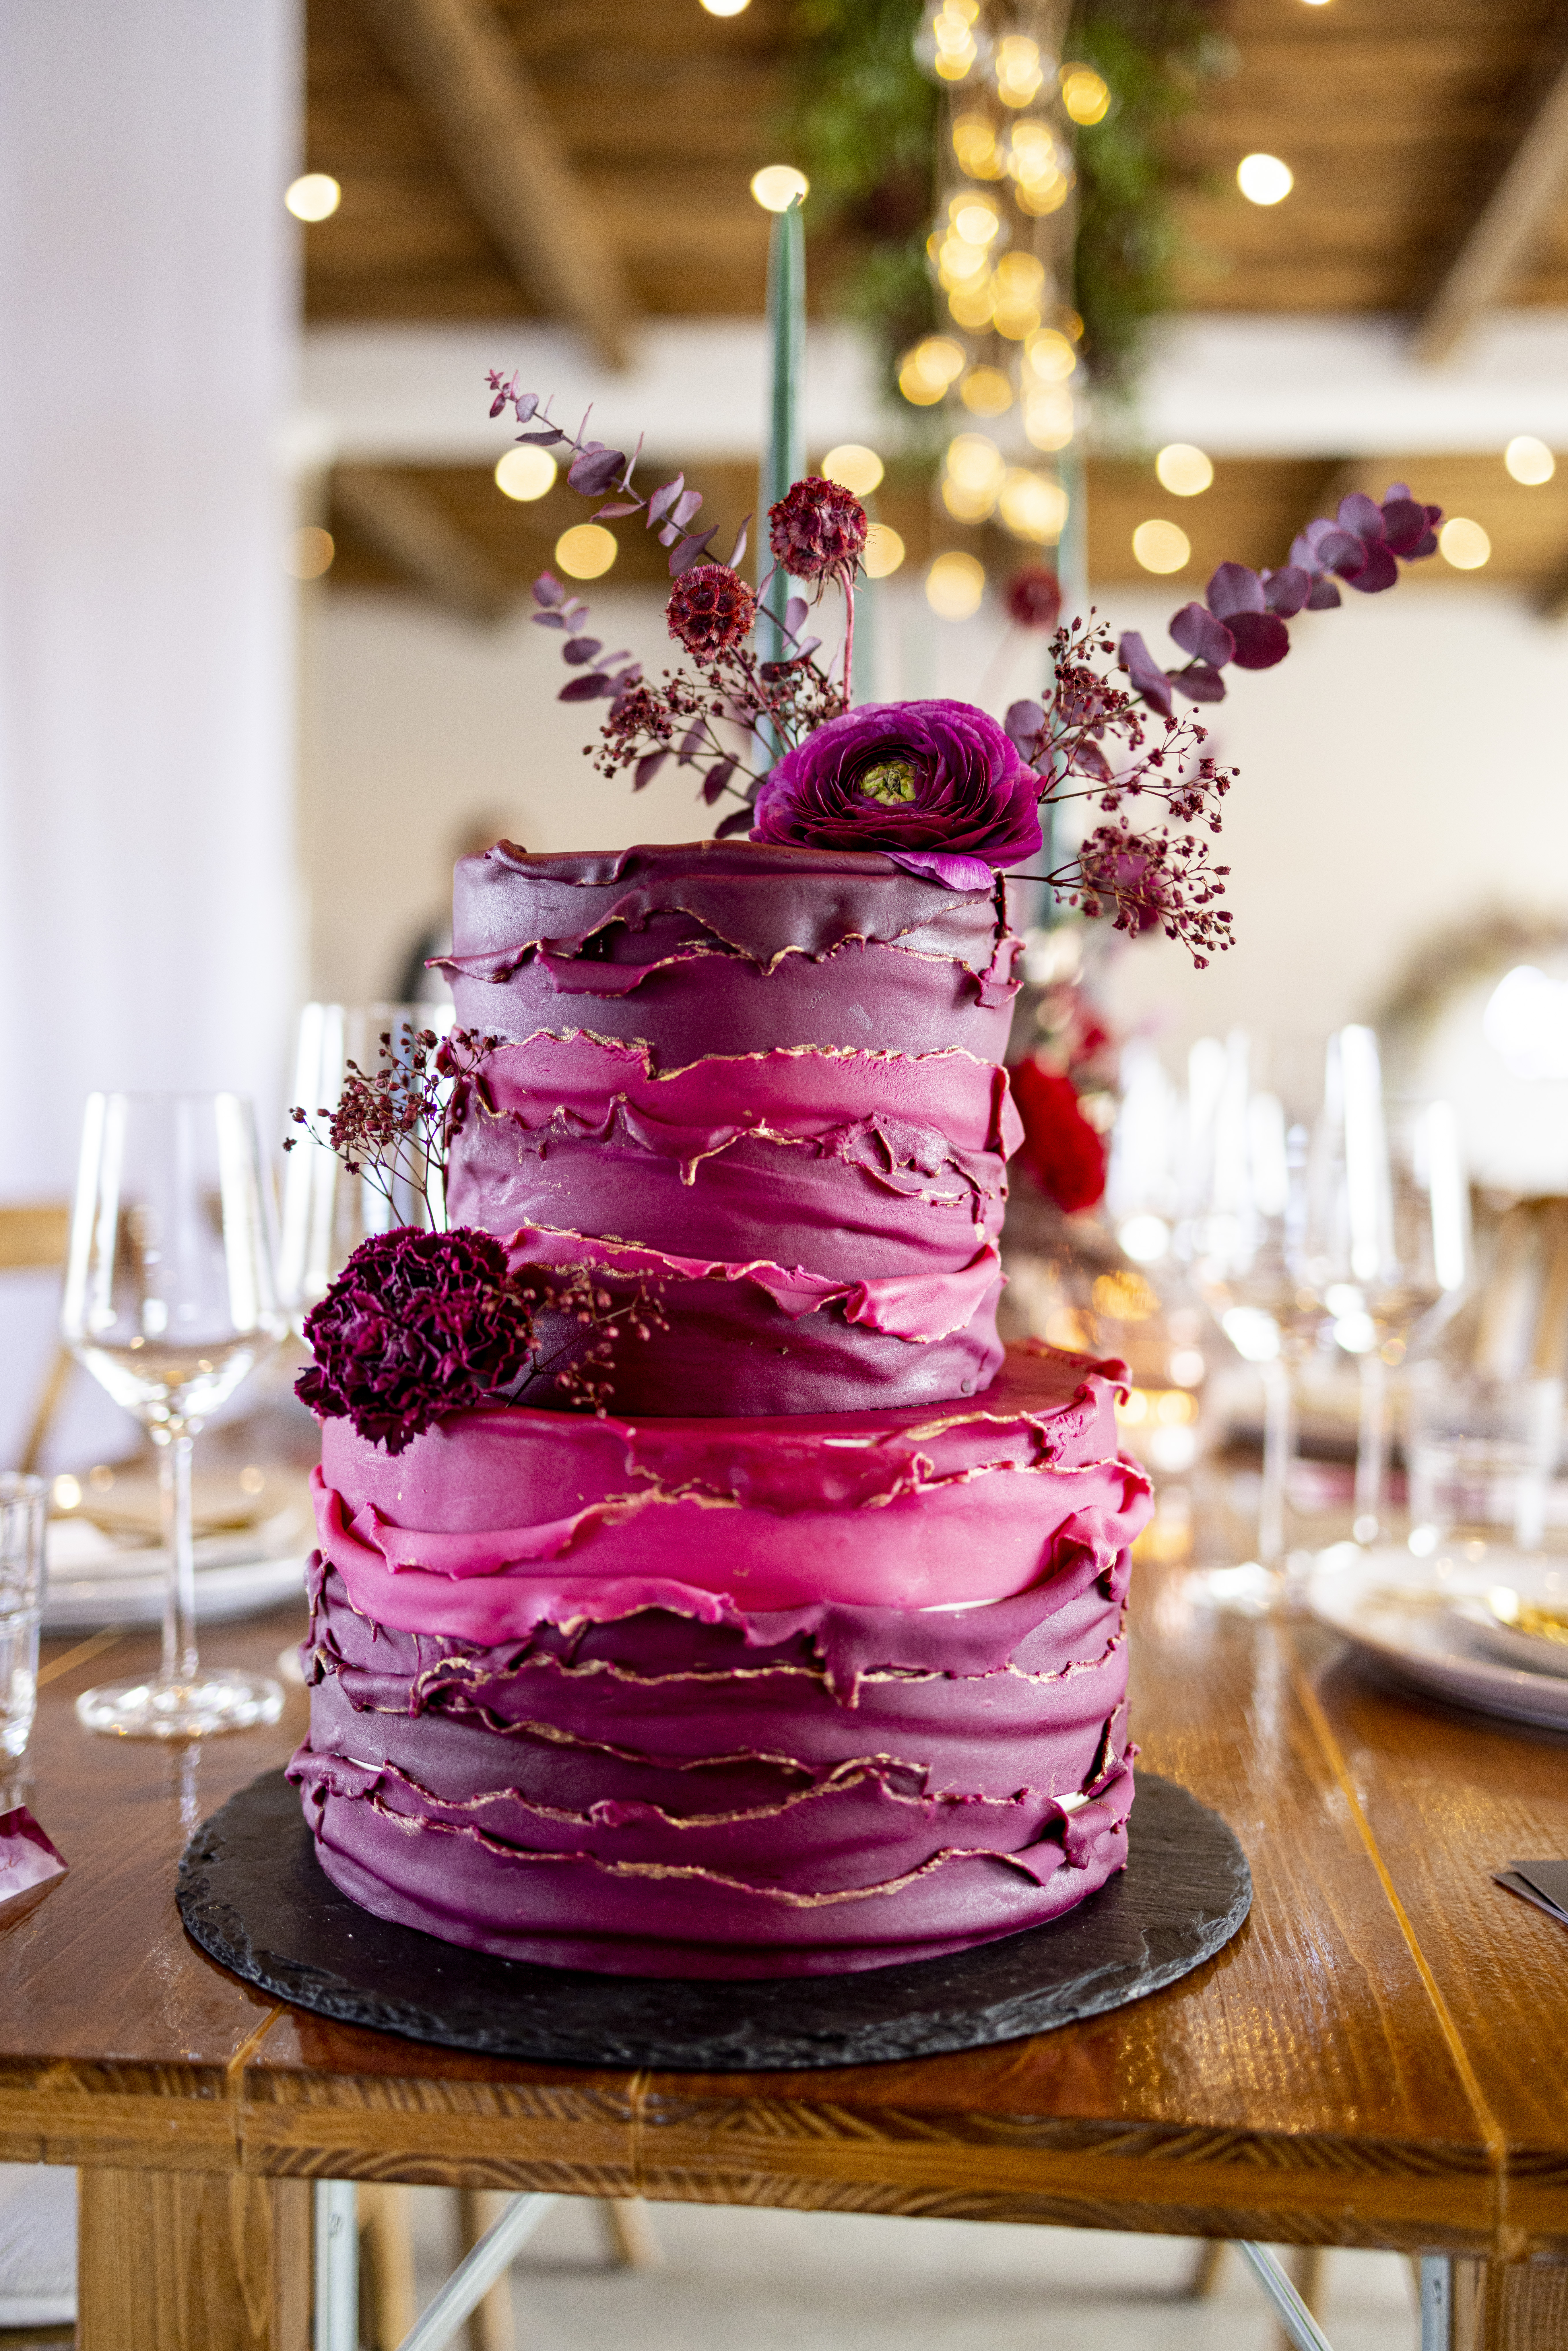 A big cake | Source: Getty Images